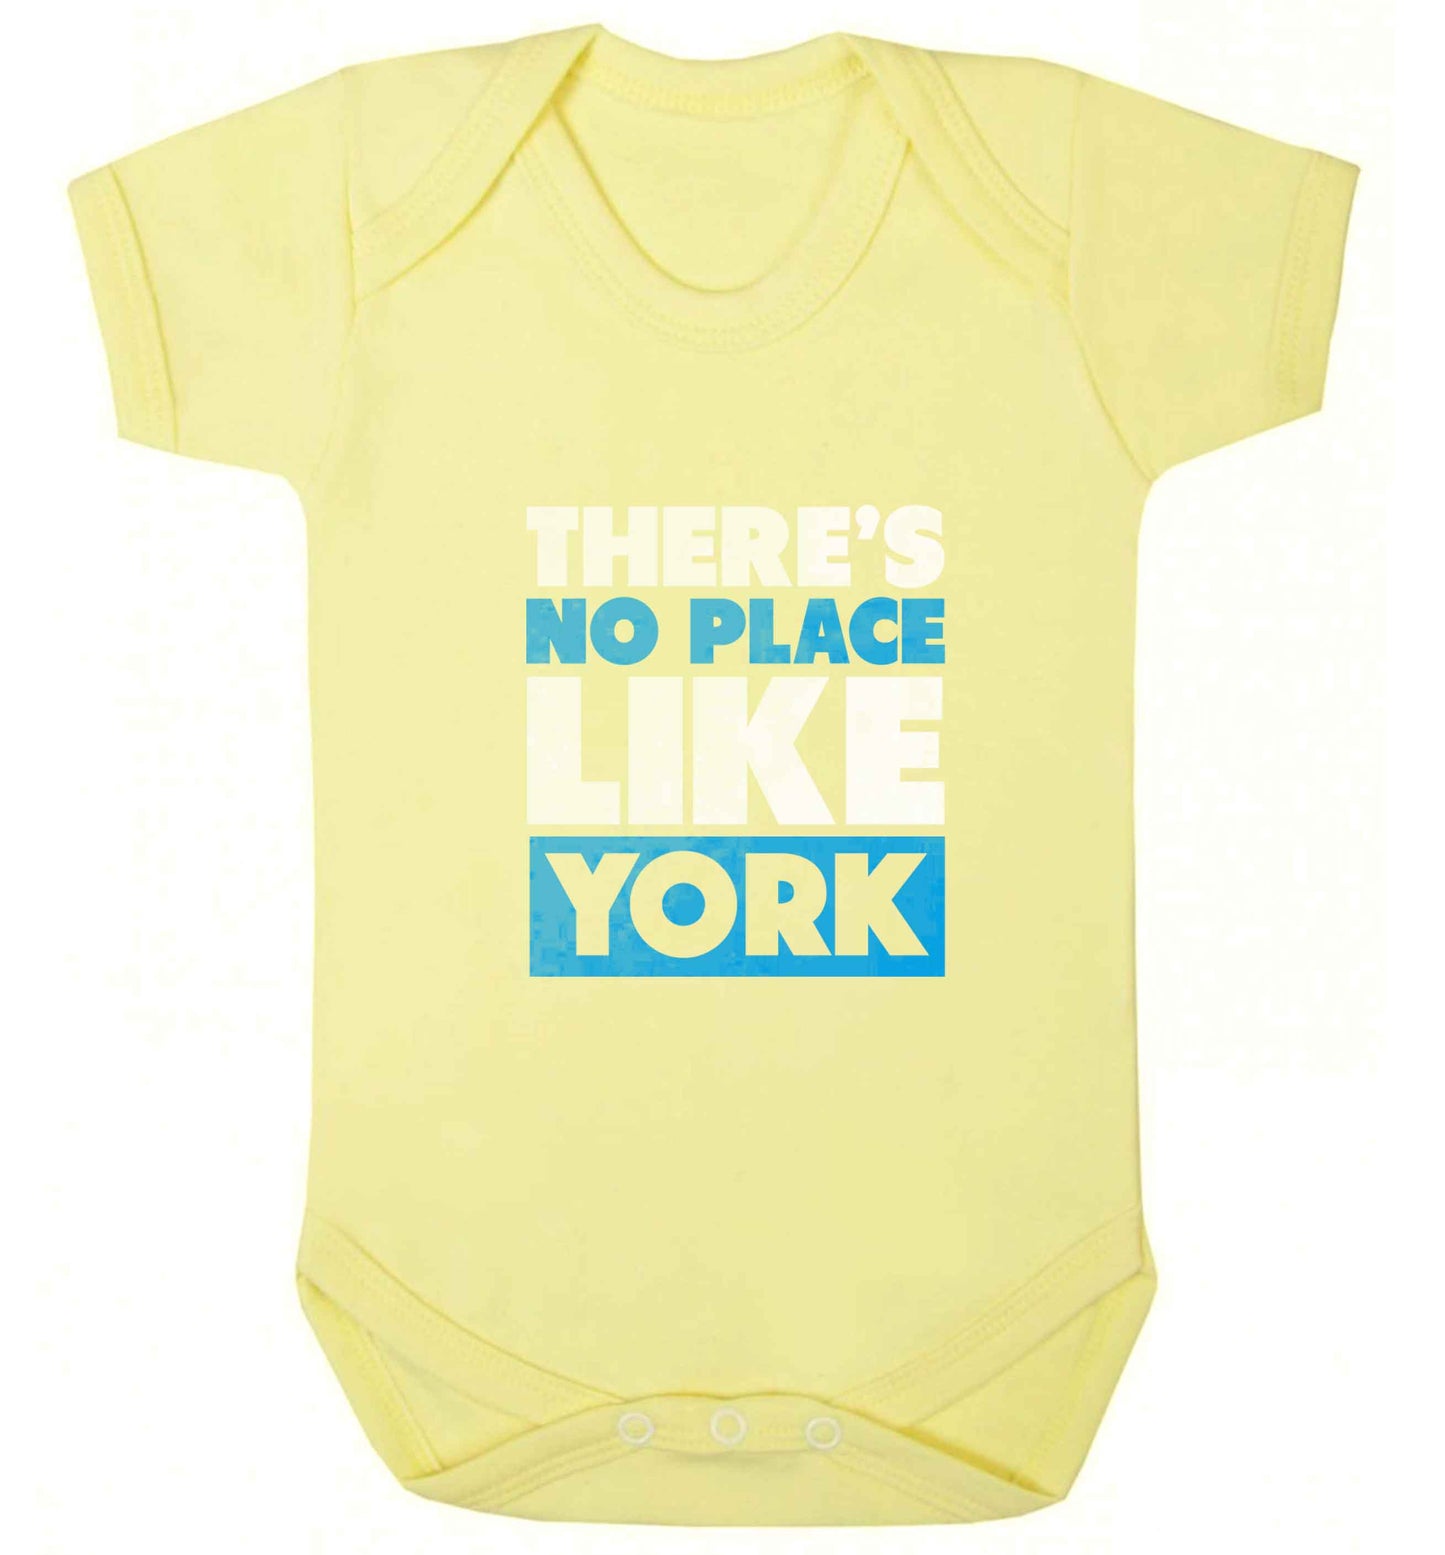 There's no place like york baby vest pale yellow 18-24 months